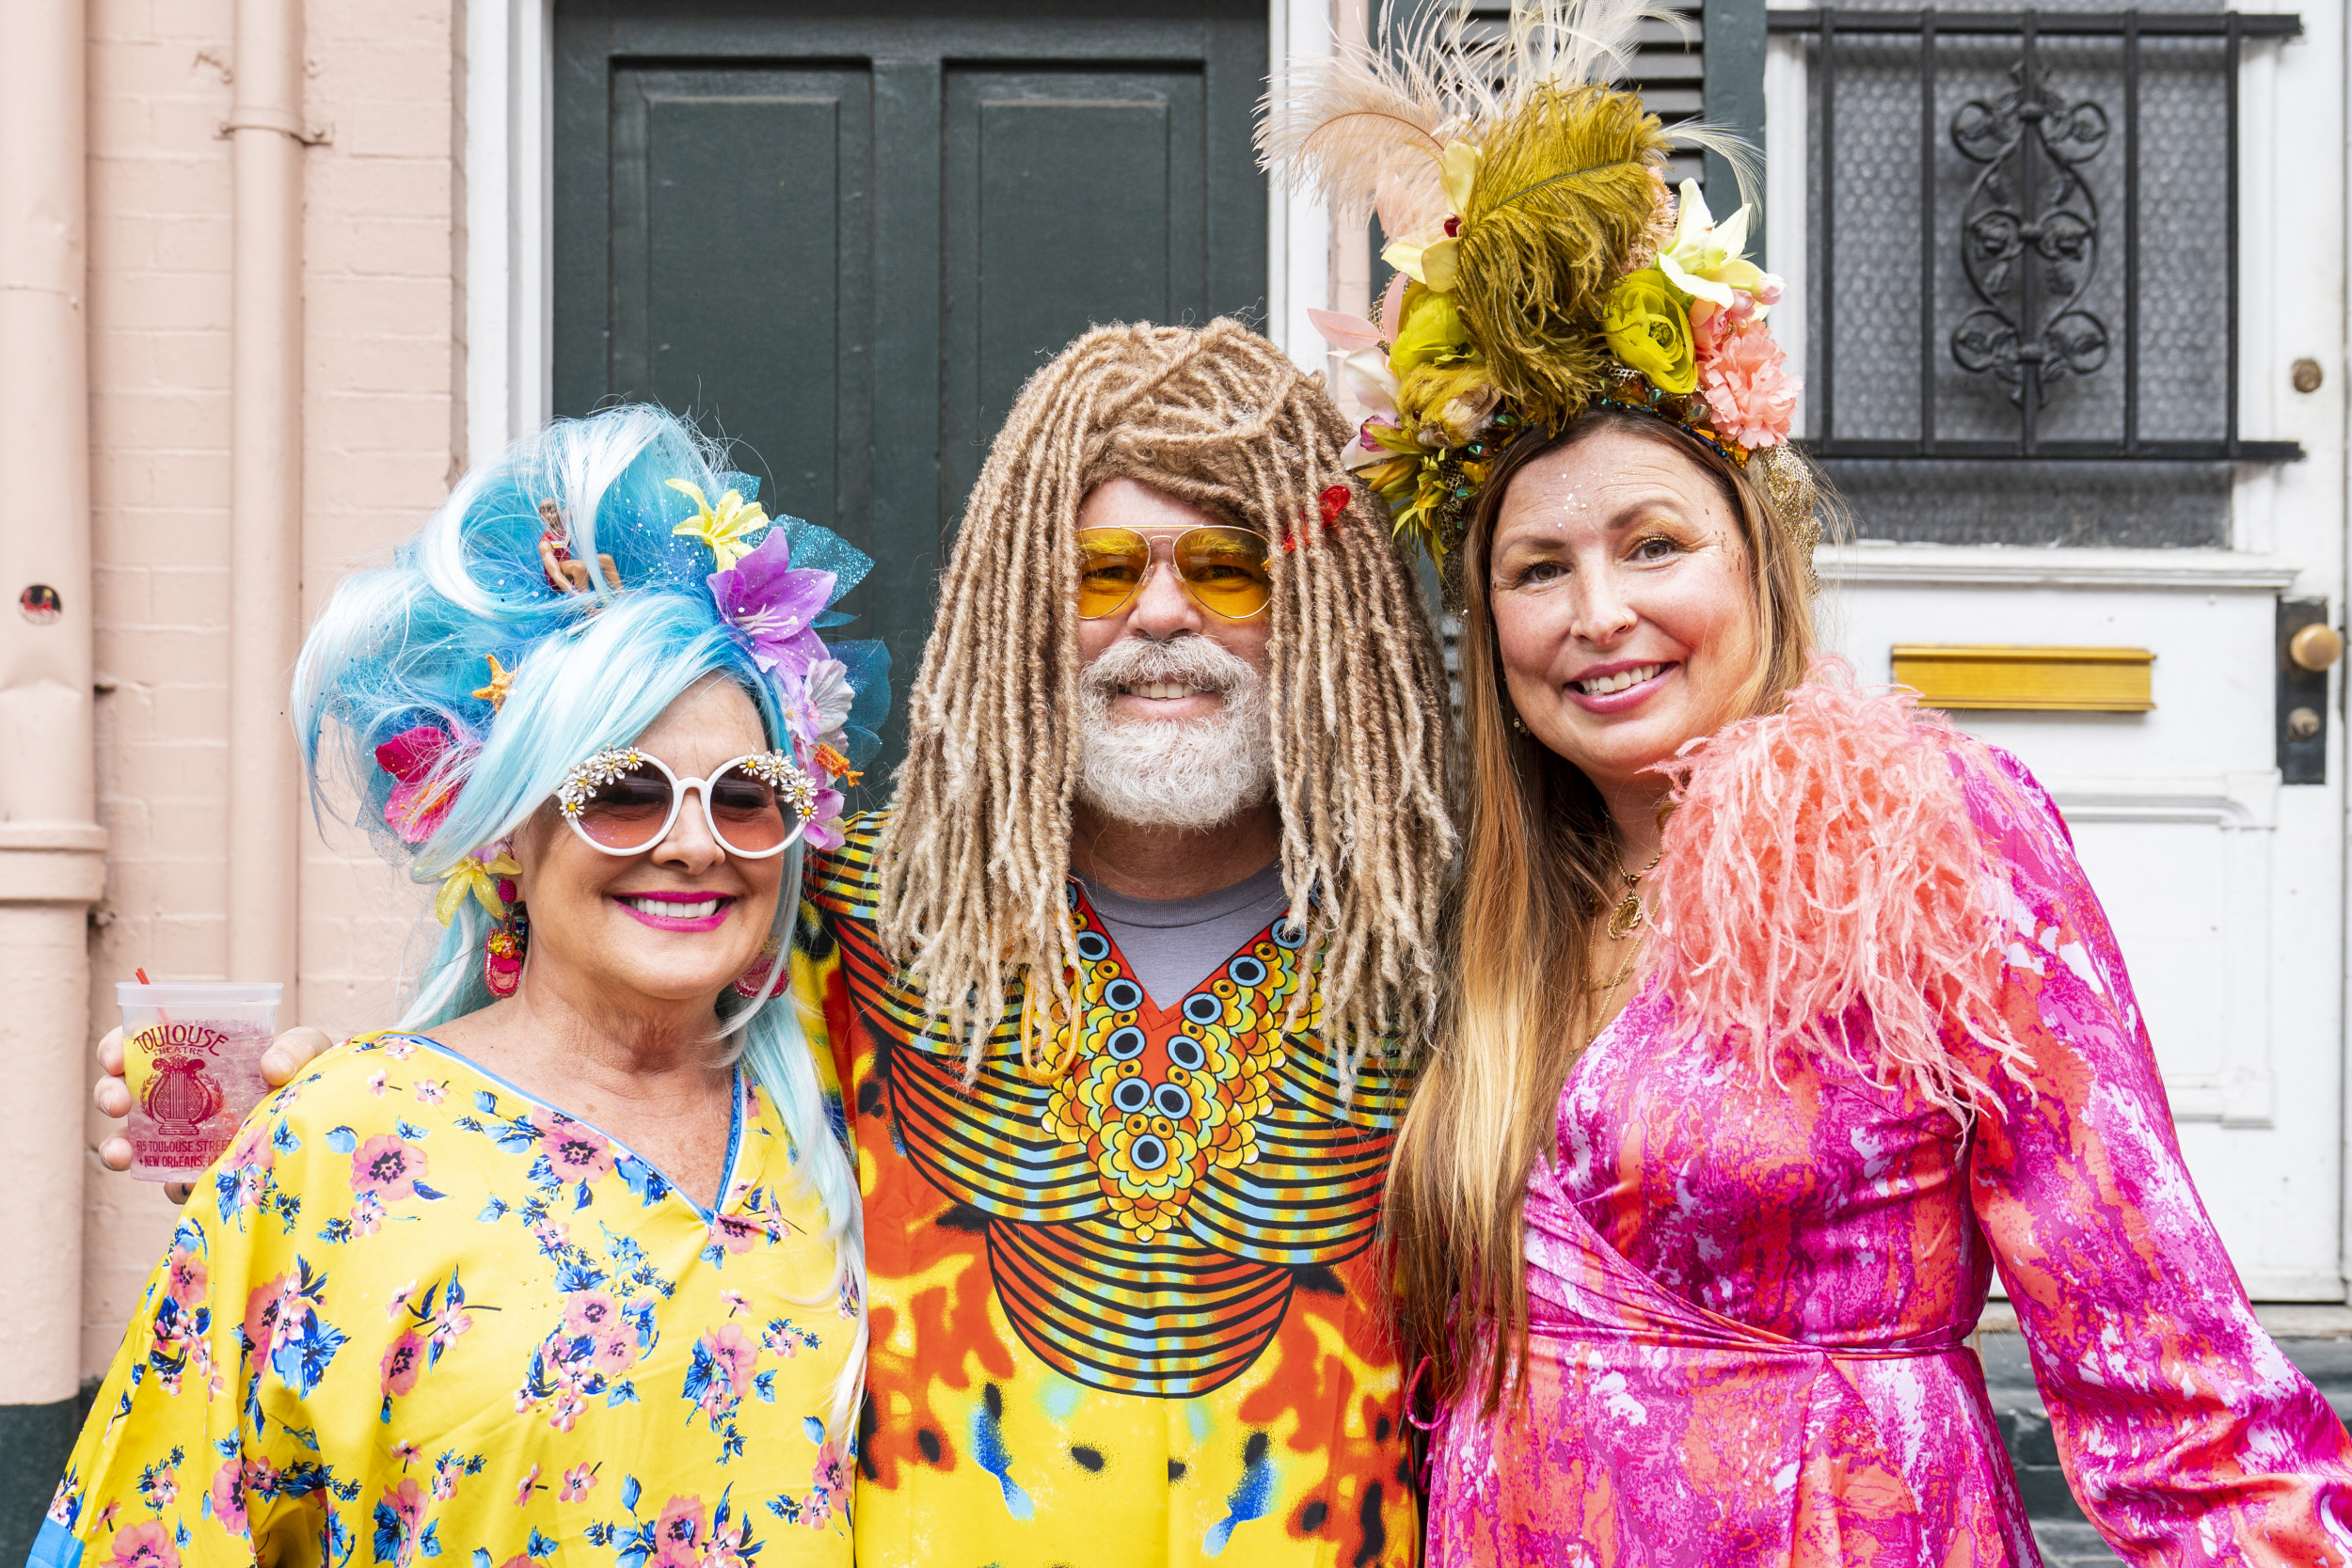 Mardi Gras 2022 Schedule, Parade Details and COVID Restrictions